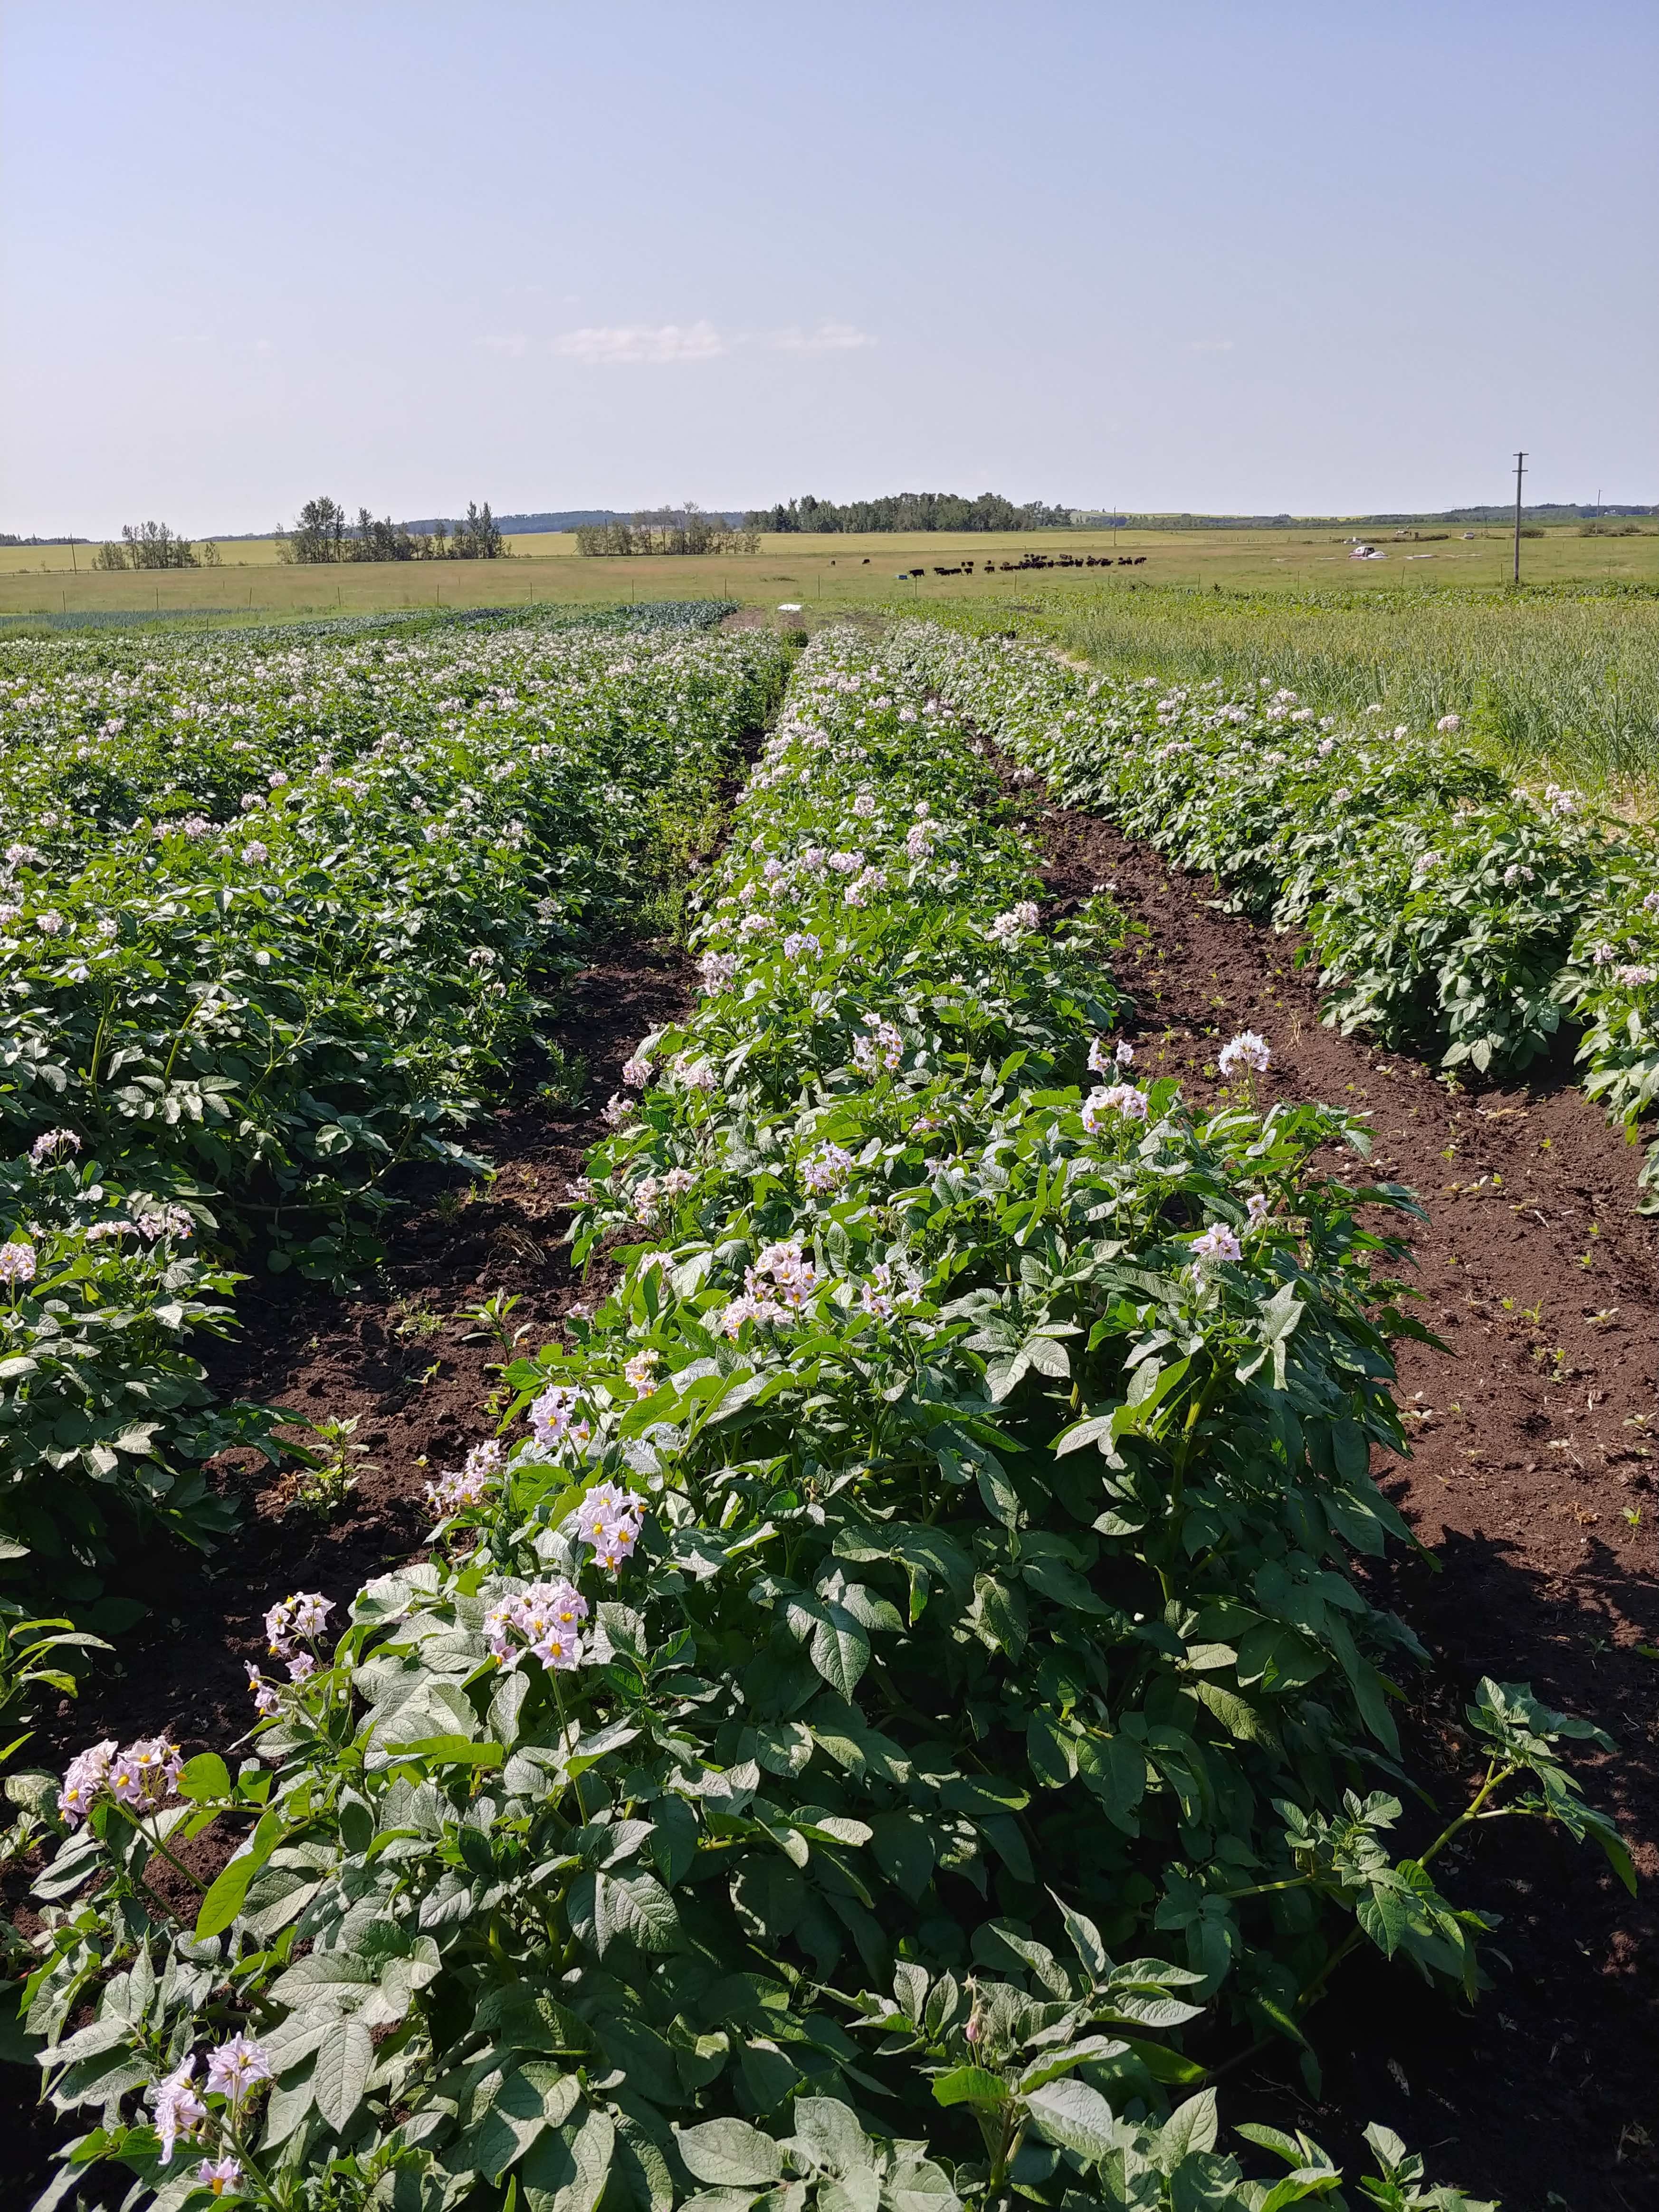 Next Happening: August 5th - Farm Happenings - Potatoes and Beef